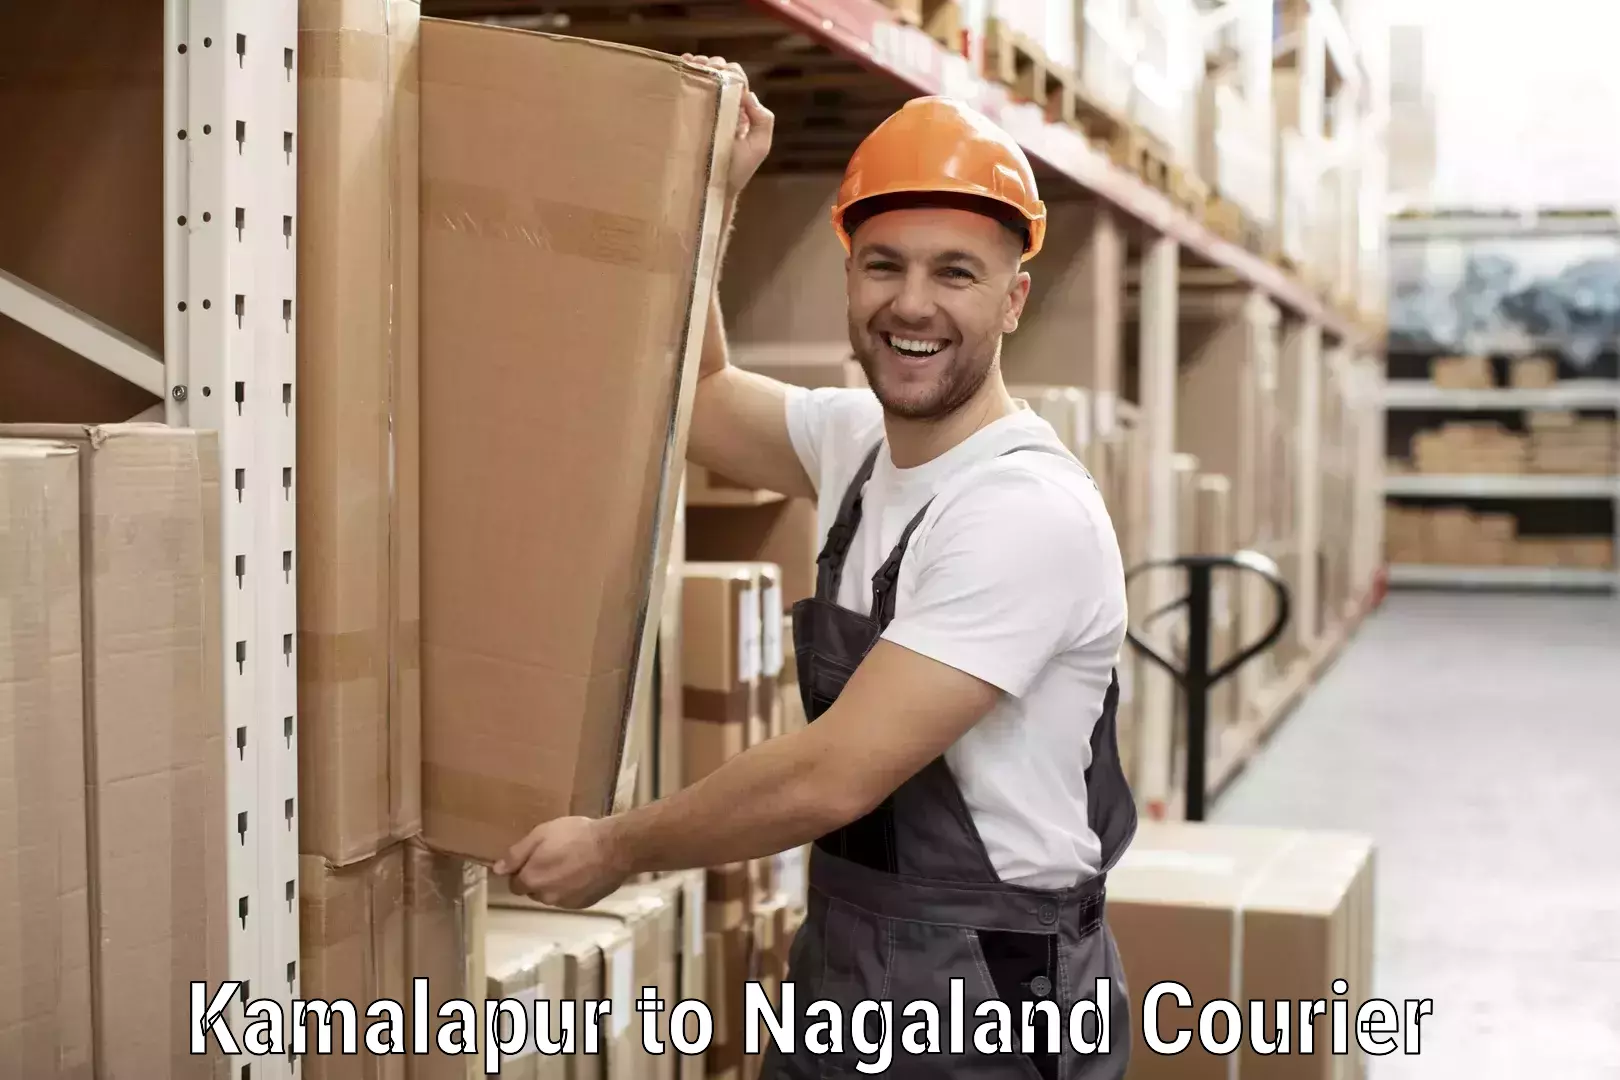 24/7 courier service in Kamalapur to Nagaland